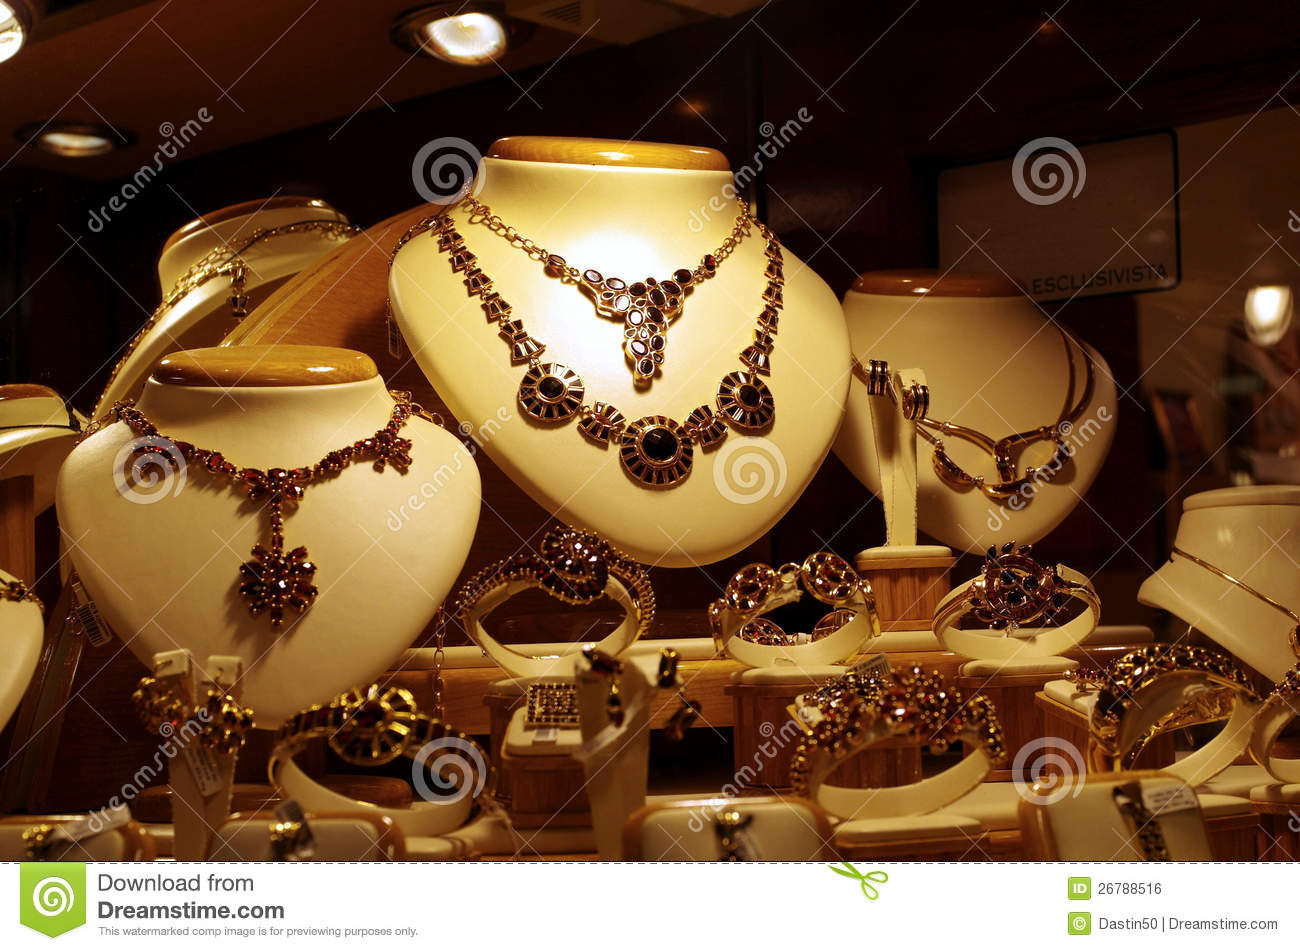 Gold Necklaces And Bracelets Displayed In A Jewelry Shop Window